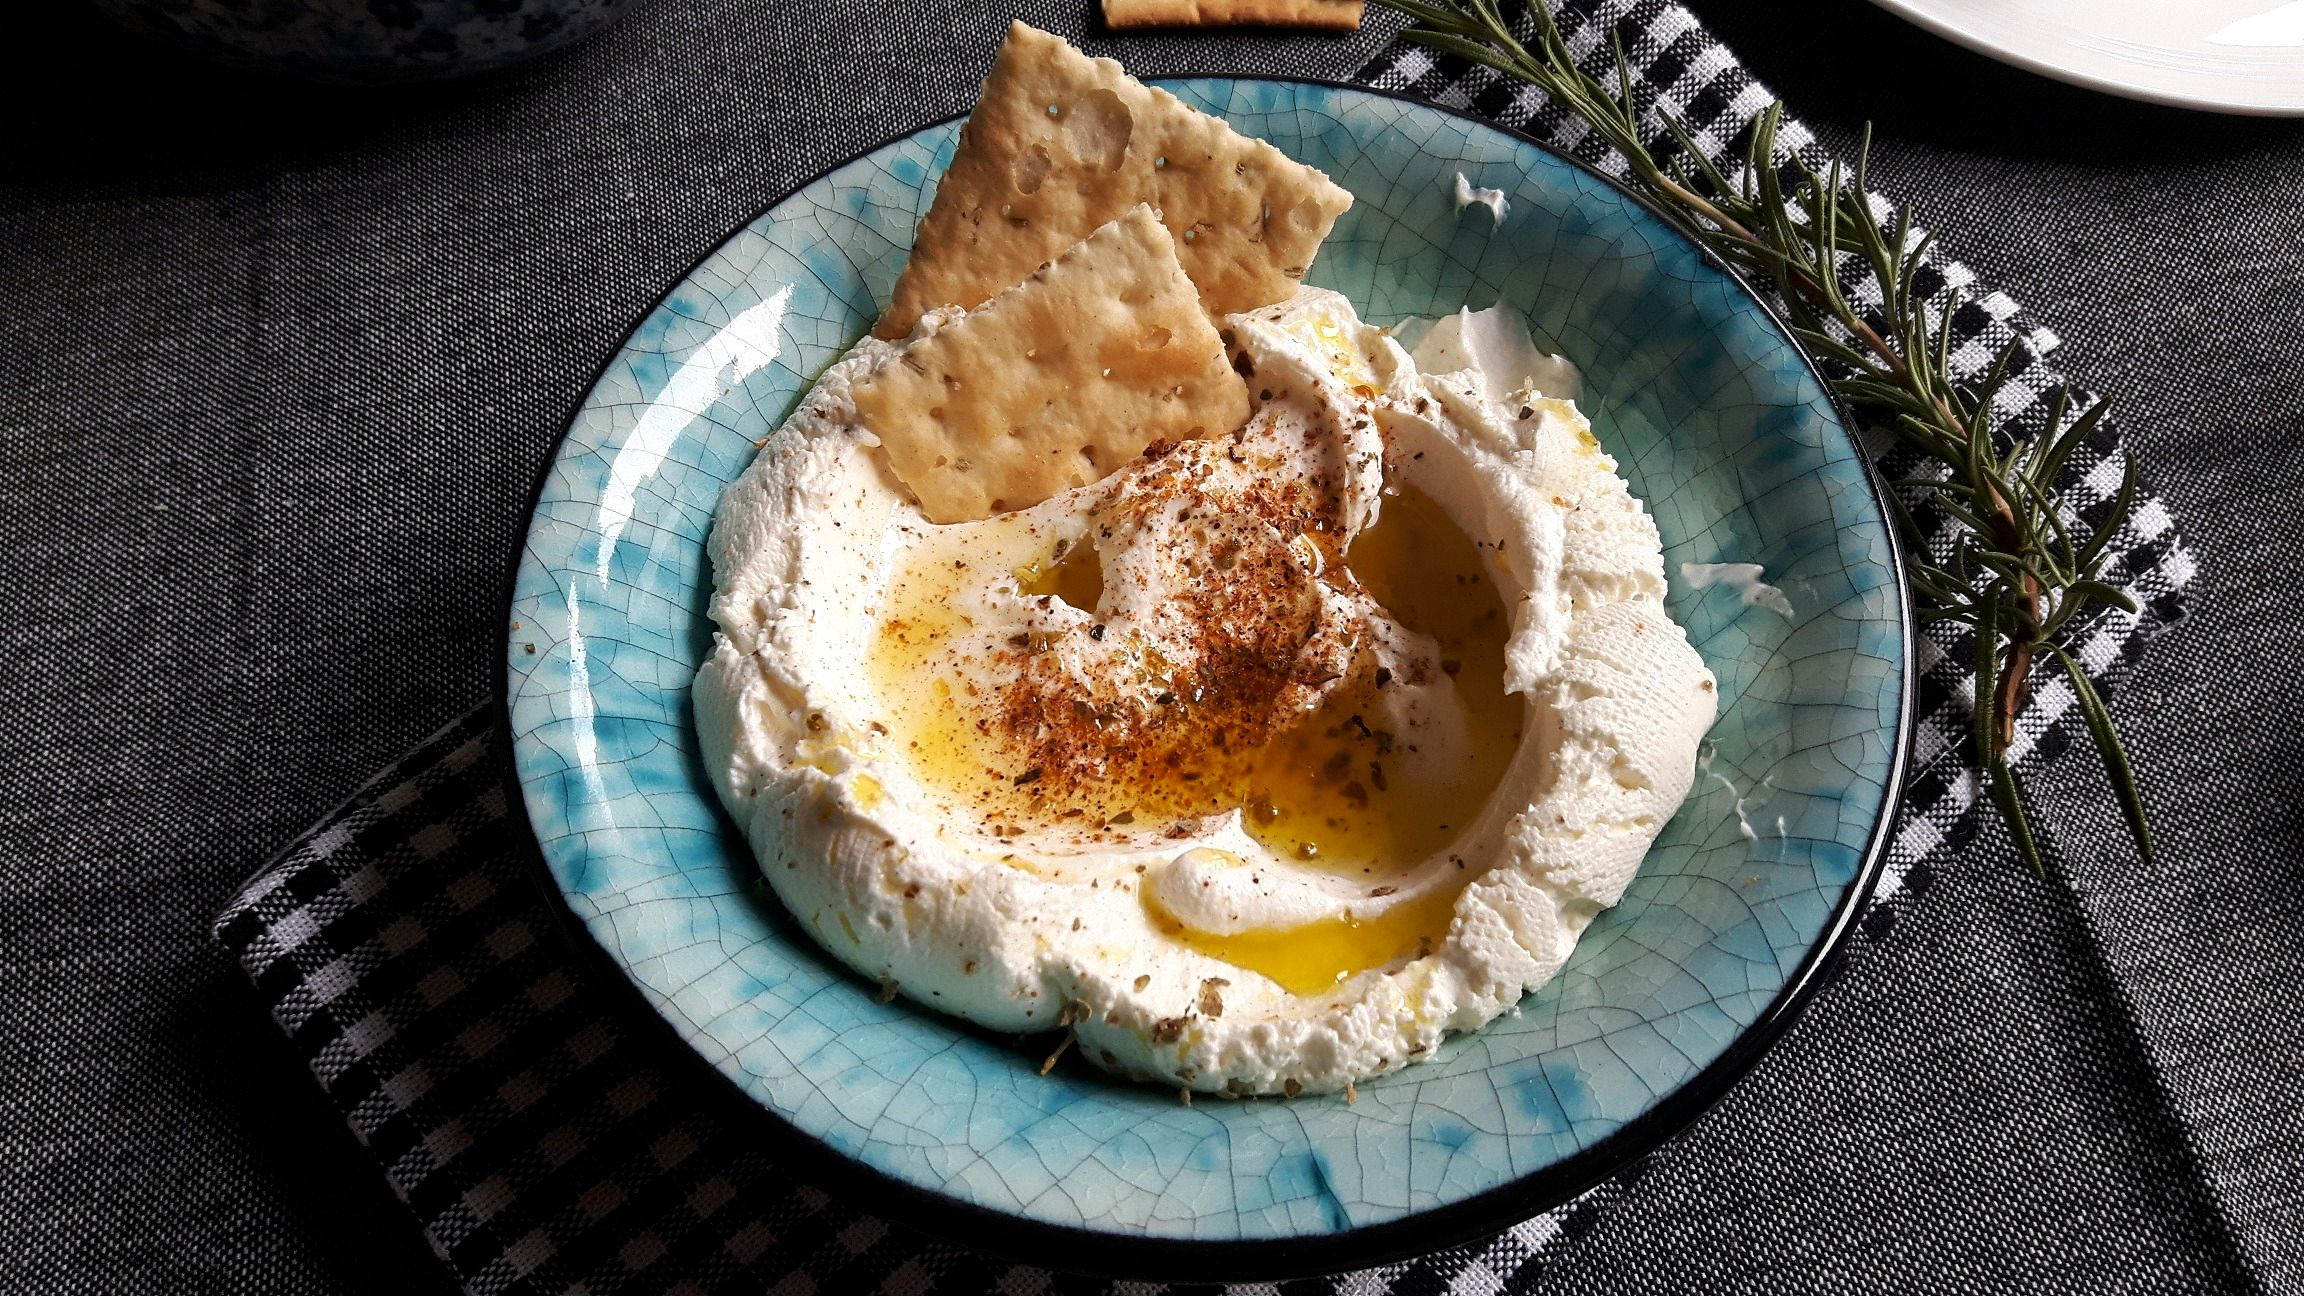 labneh-the-oriental-yogurt-cheese-has-a-place-in-my-transylvanian-kitchen